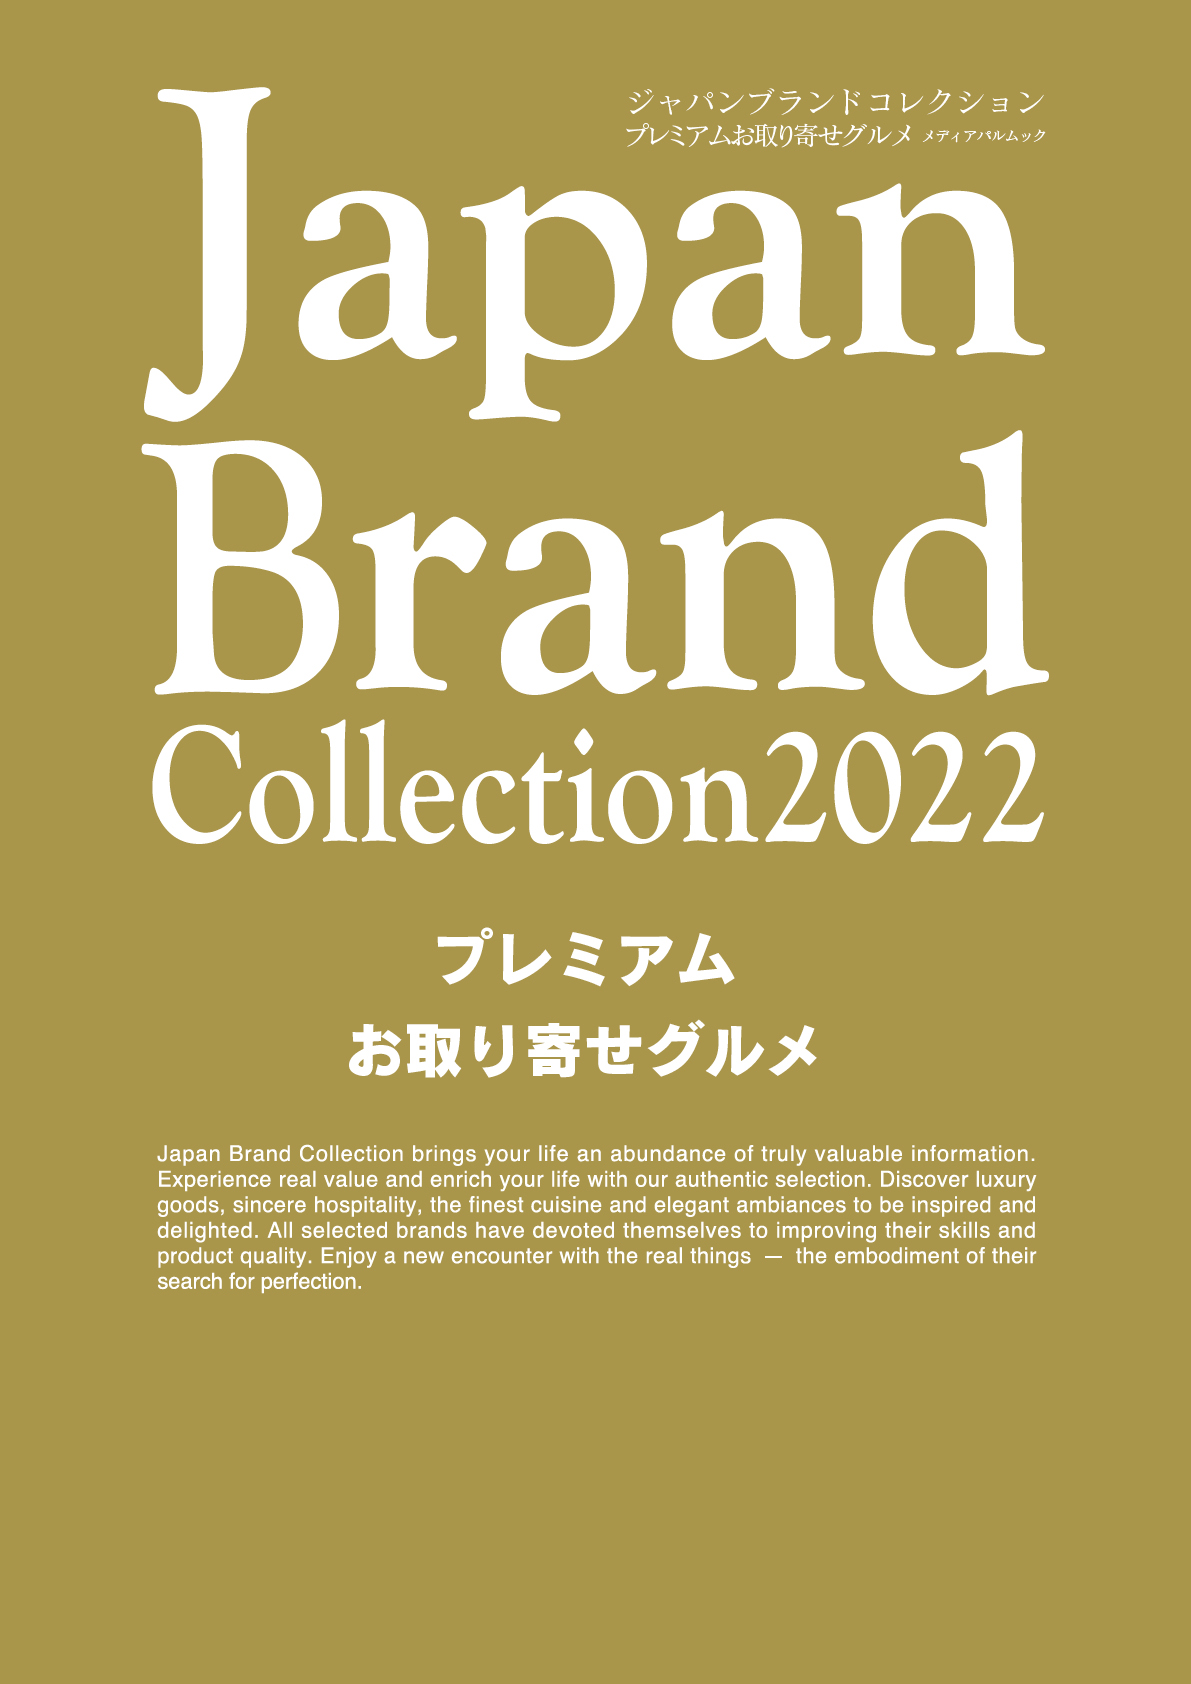 JapanBrand Collection 2022 プレミアムお取り寄せグルメ